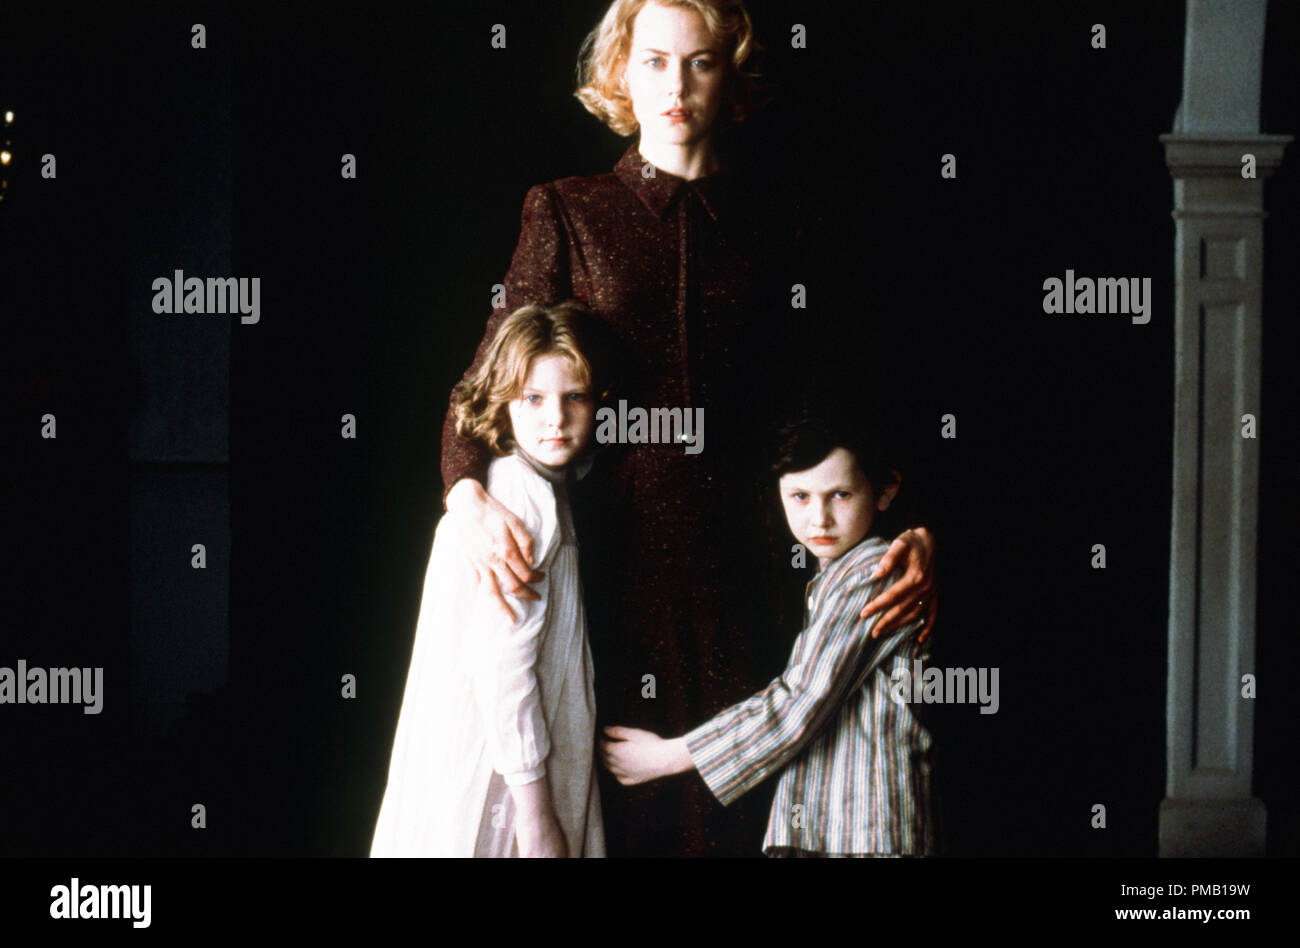 Nicole Kidman, Alakina Mann, James Bentley, 'The Others' (2001) Dimension Films File Reference # 33018 048THA  For Editorial Use Only -  All Rights Reserved Stock Photo